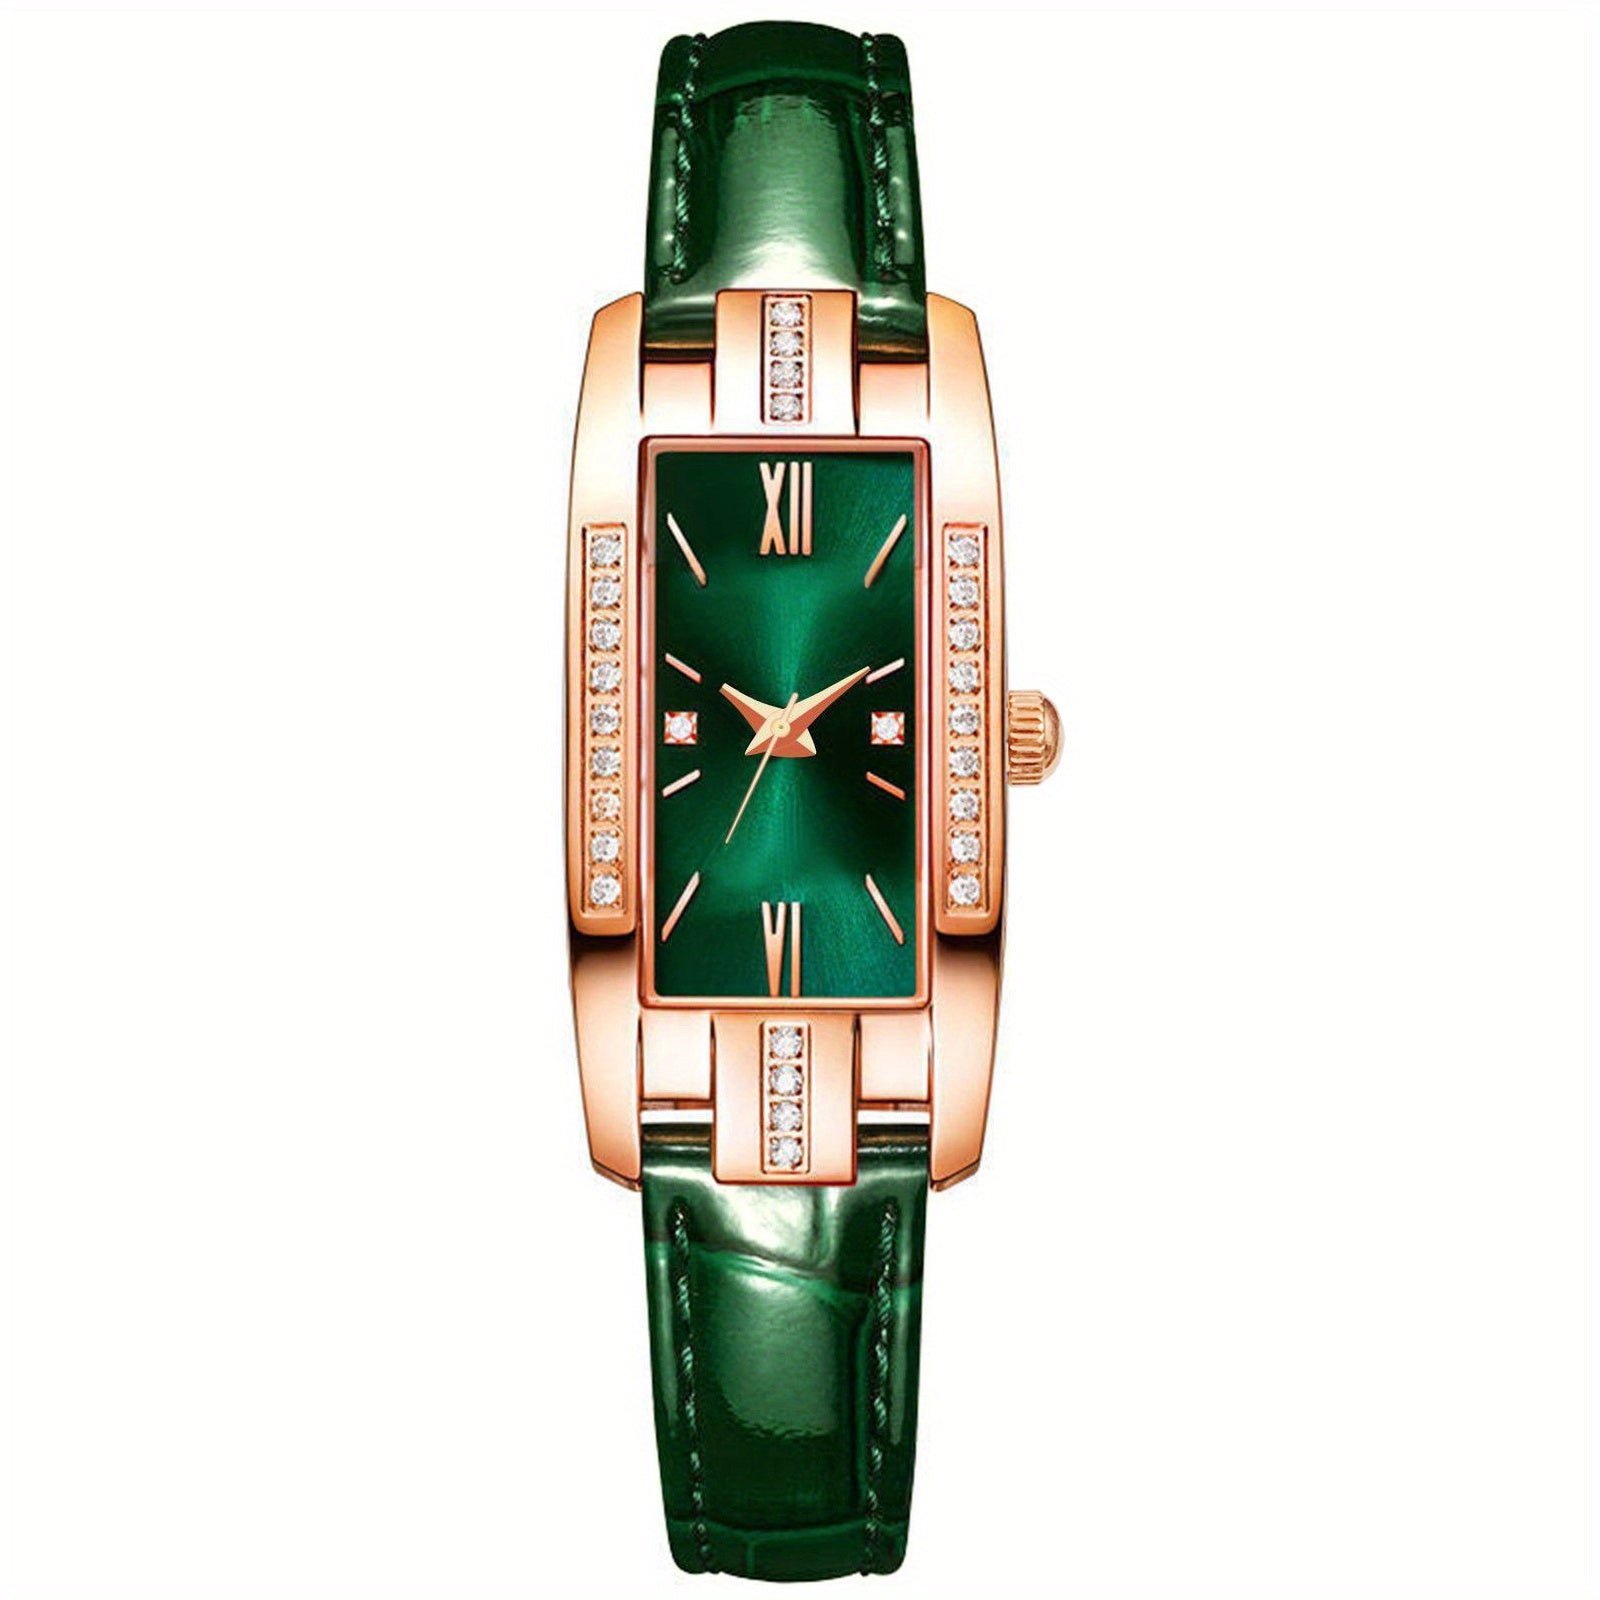 Lady Quartz Small Watch With Square Roman Numerals Dial Vintage Dress Watch Rhinestone Wristwatches Green